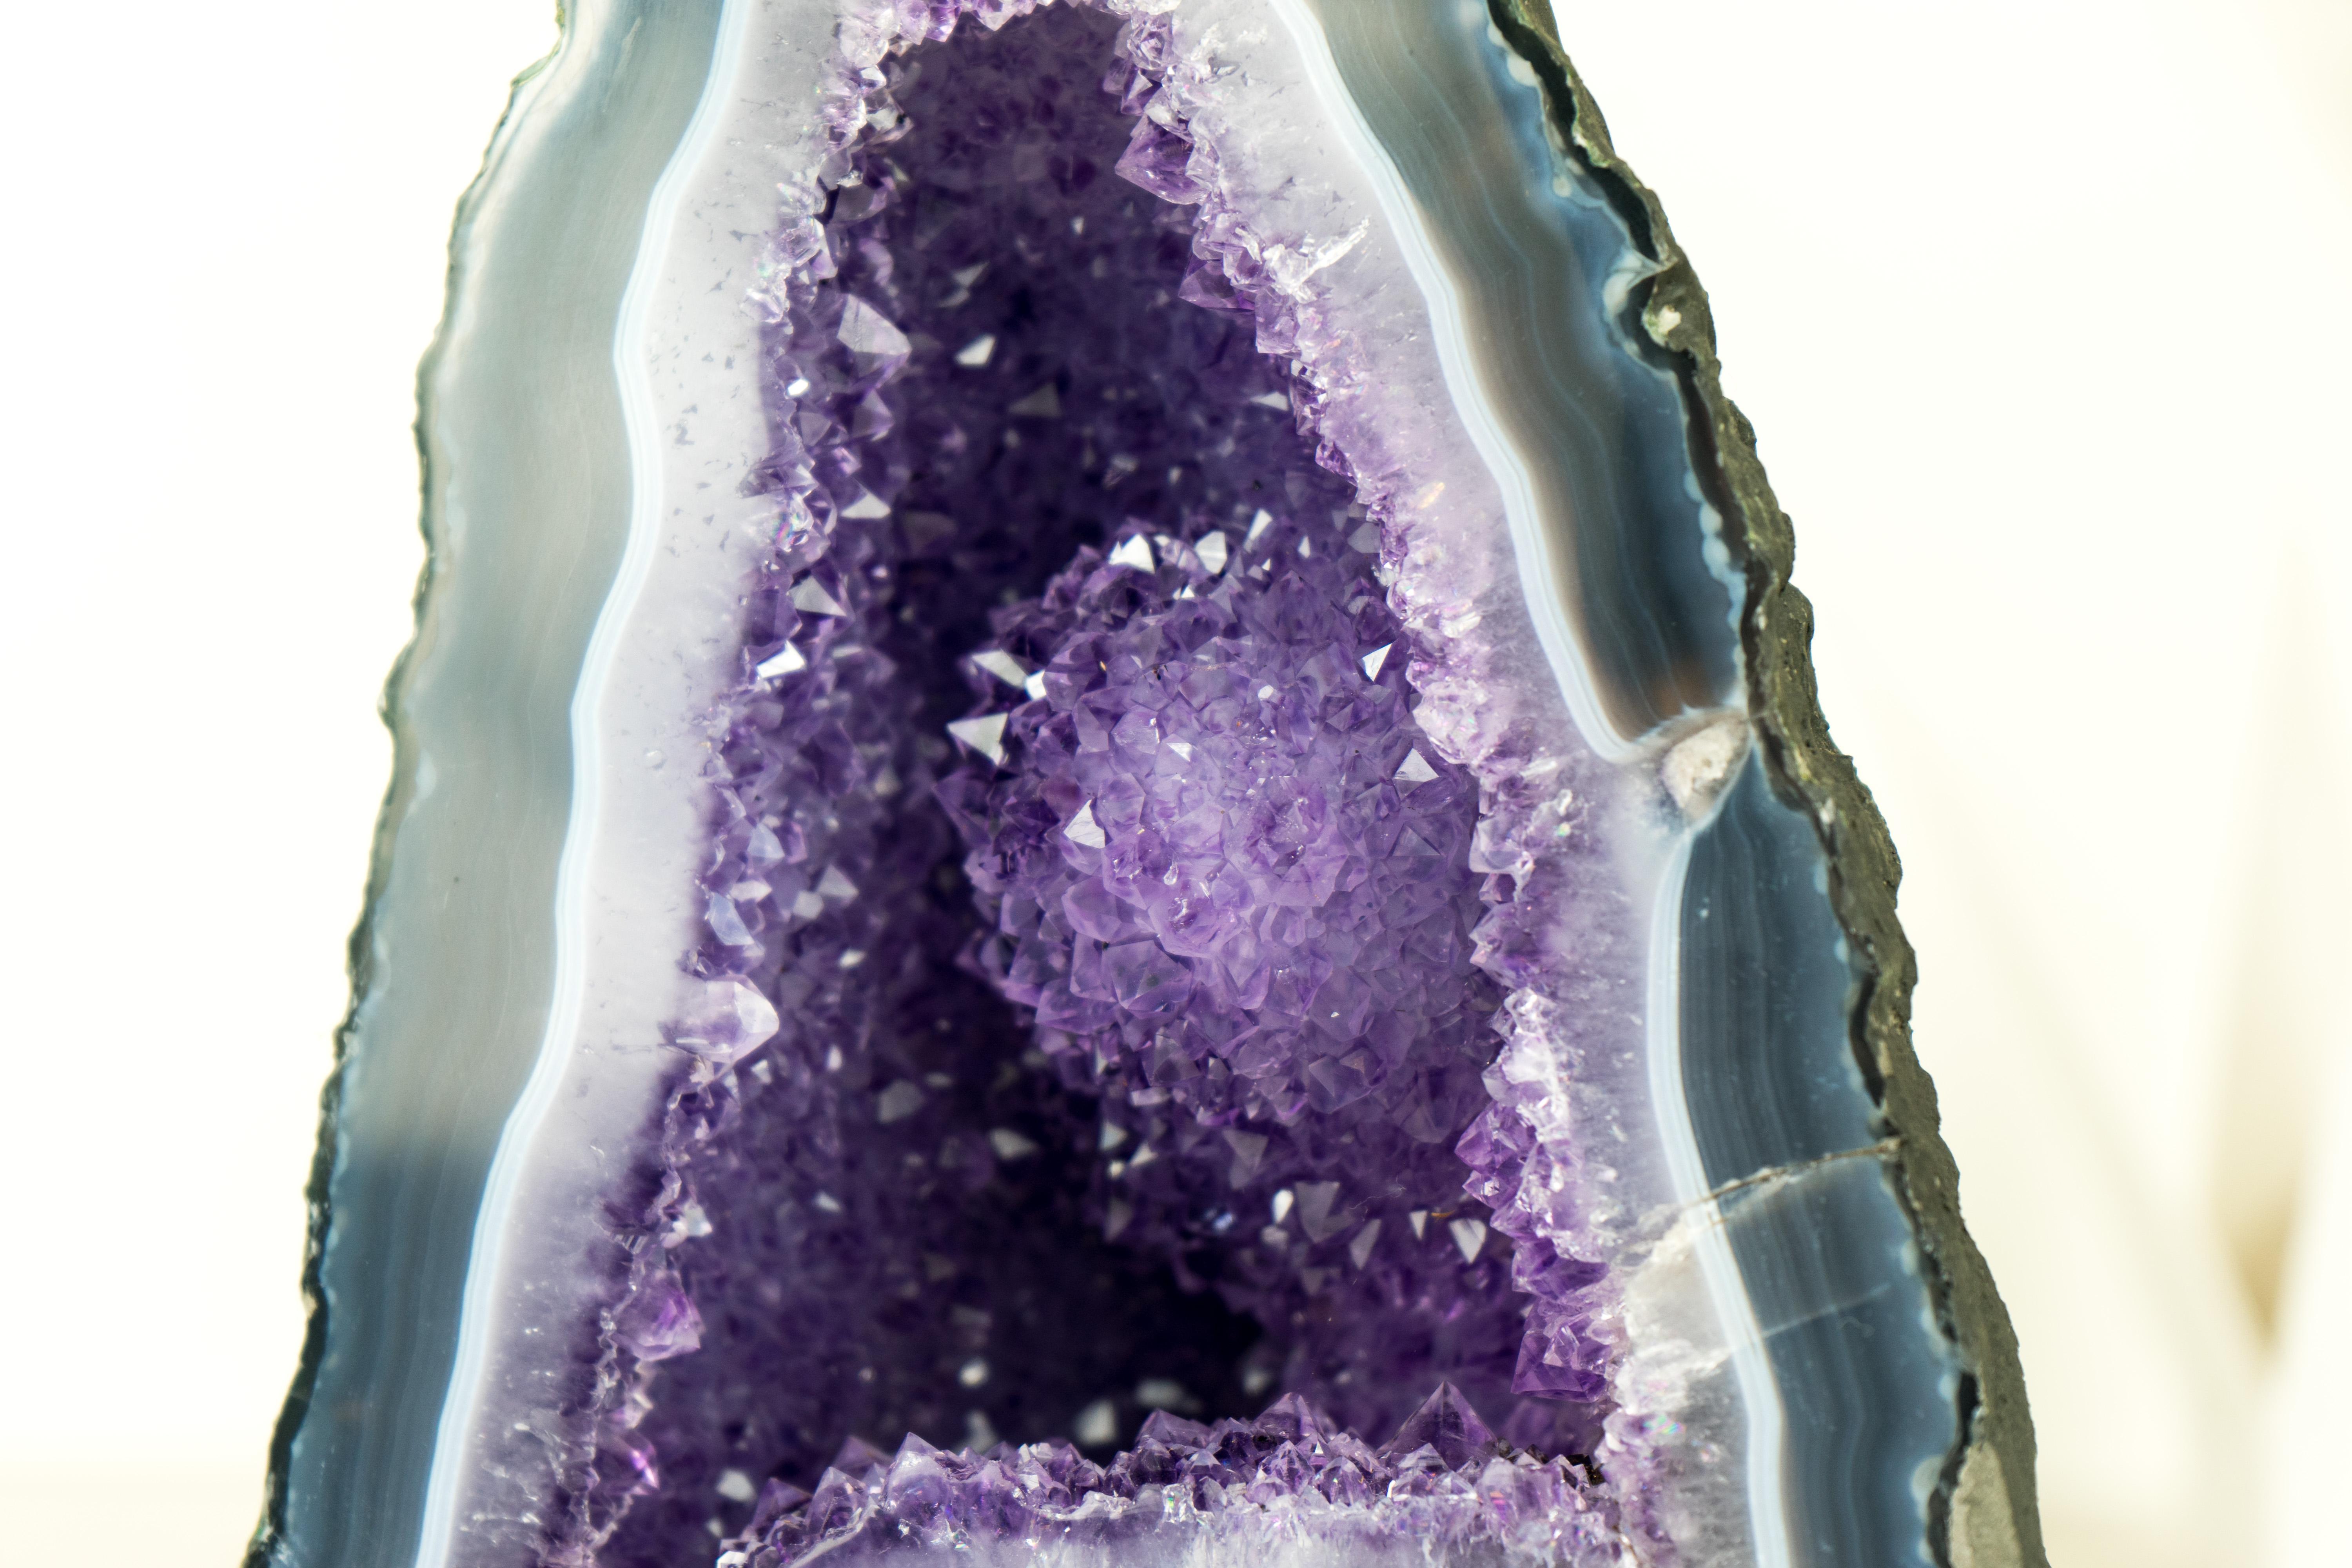 A natural masterpiece, this pair of geodes brings gorgeous Blue and White Lace patterns that form a frame for the gentle Lilac (Rose de France) Amethyst to emerge, crowned by the large Amethyst Rosette blooming from within. A piece of natural